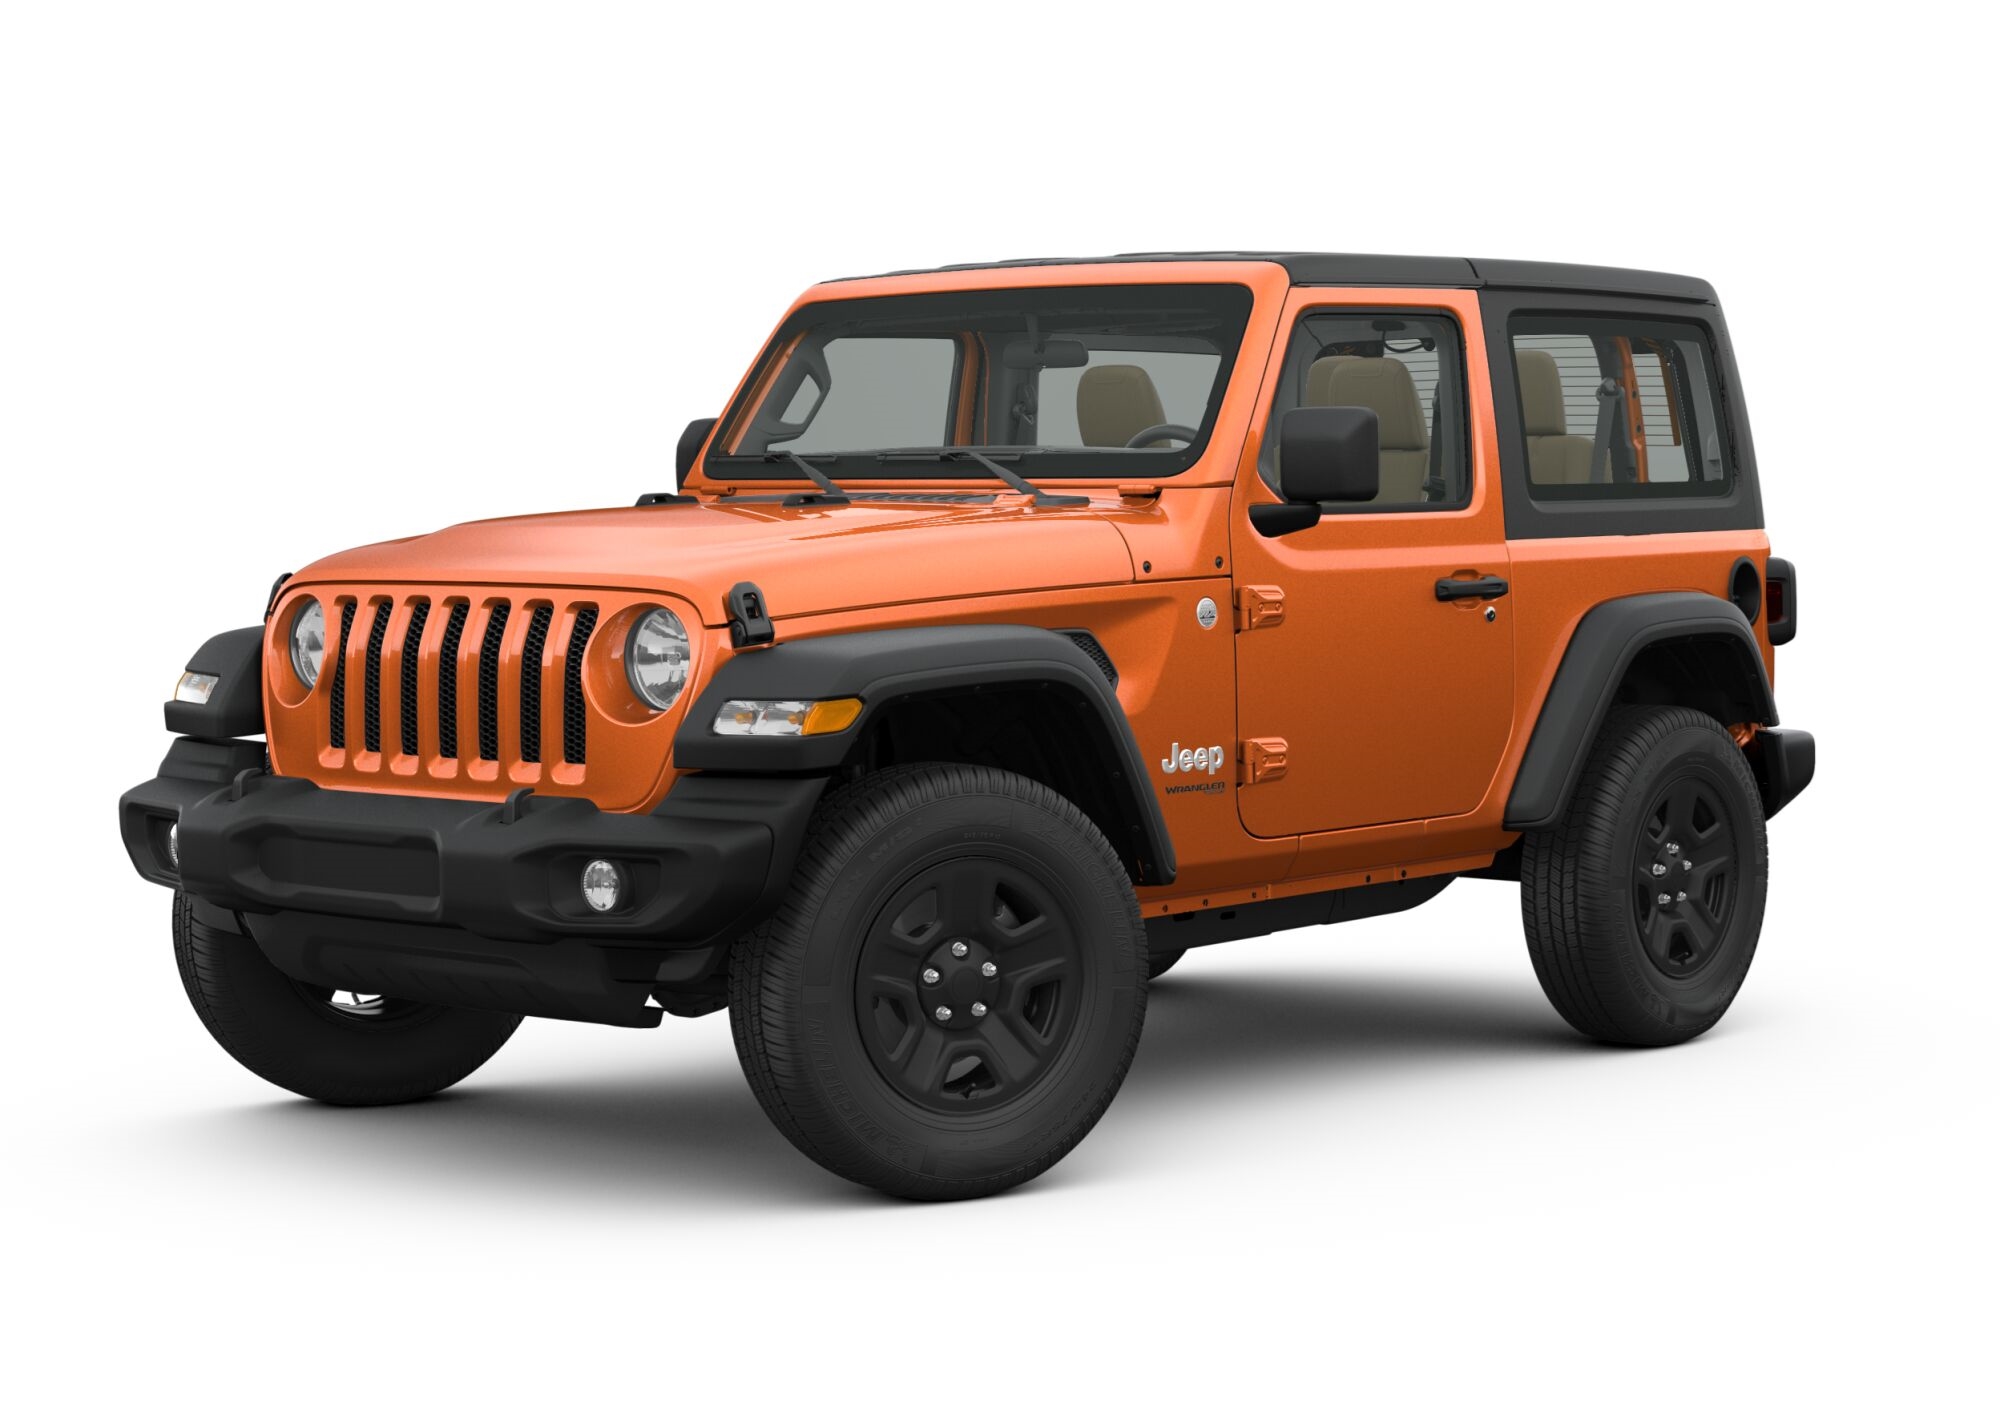 2021 Jeep Wrangler Willys Sport Full Specs, Features and Price | CarBuzz